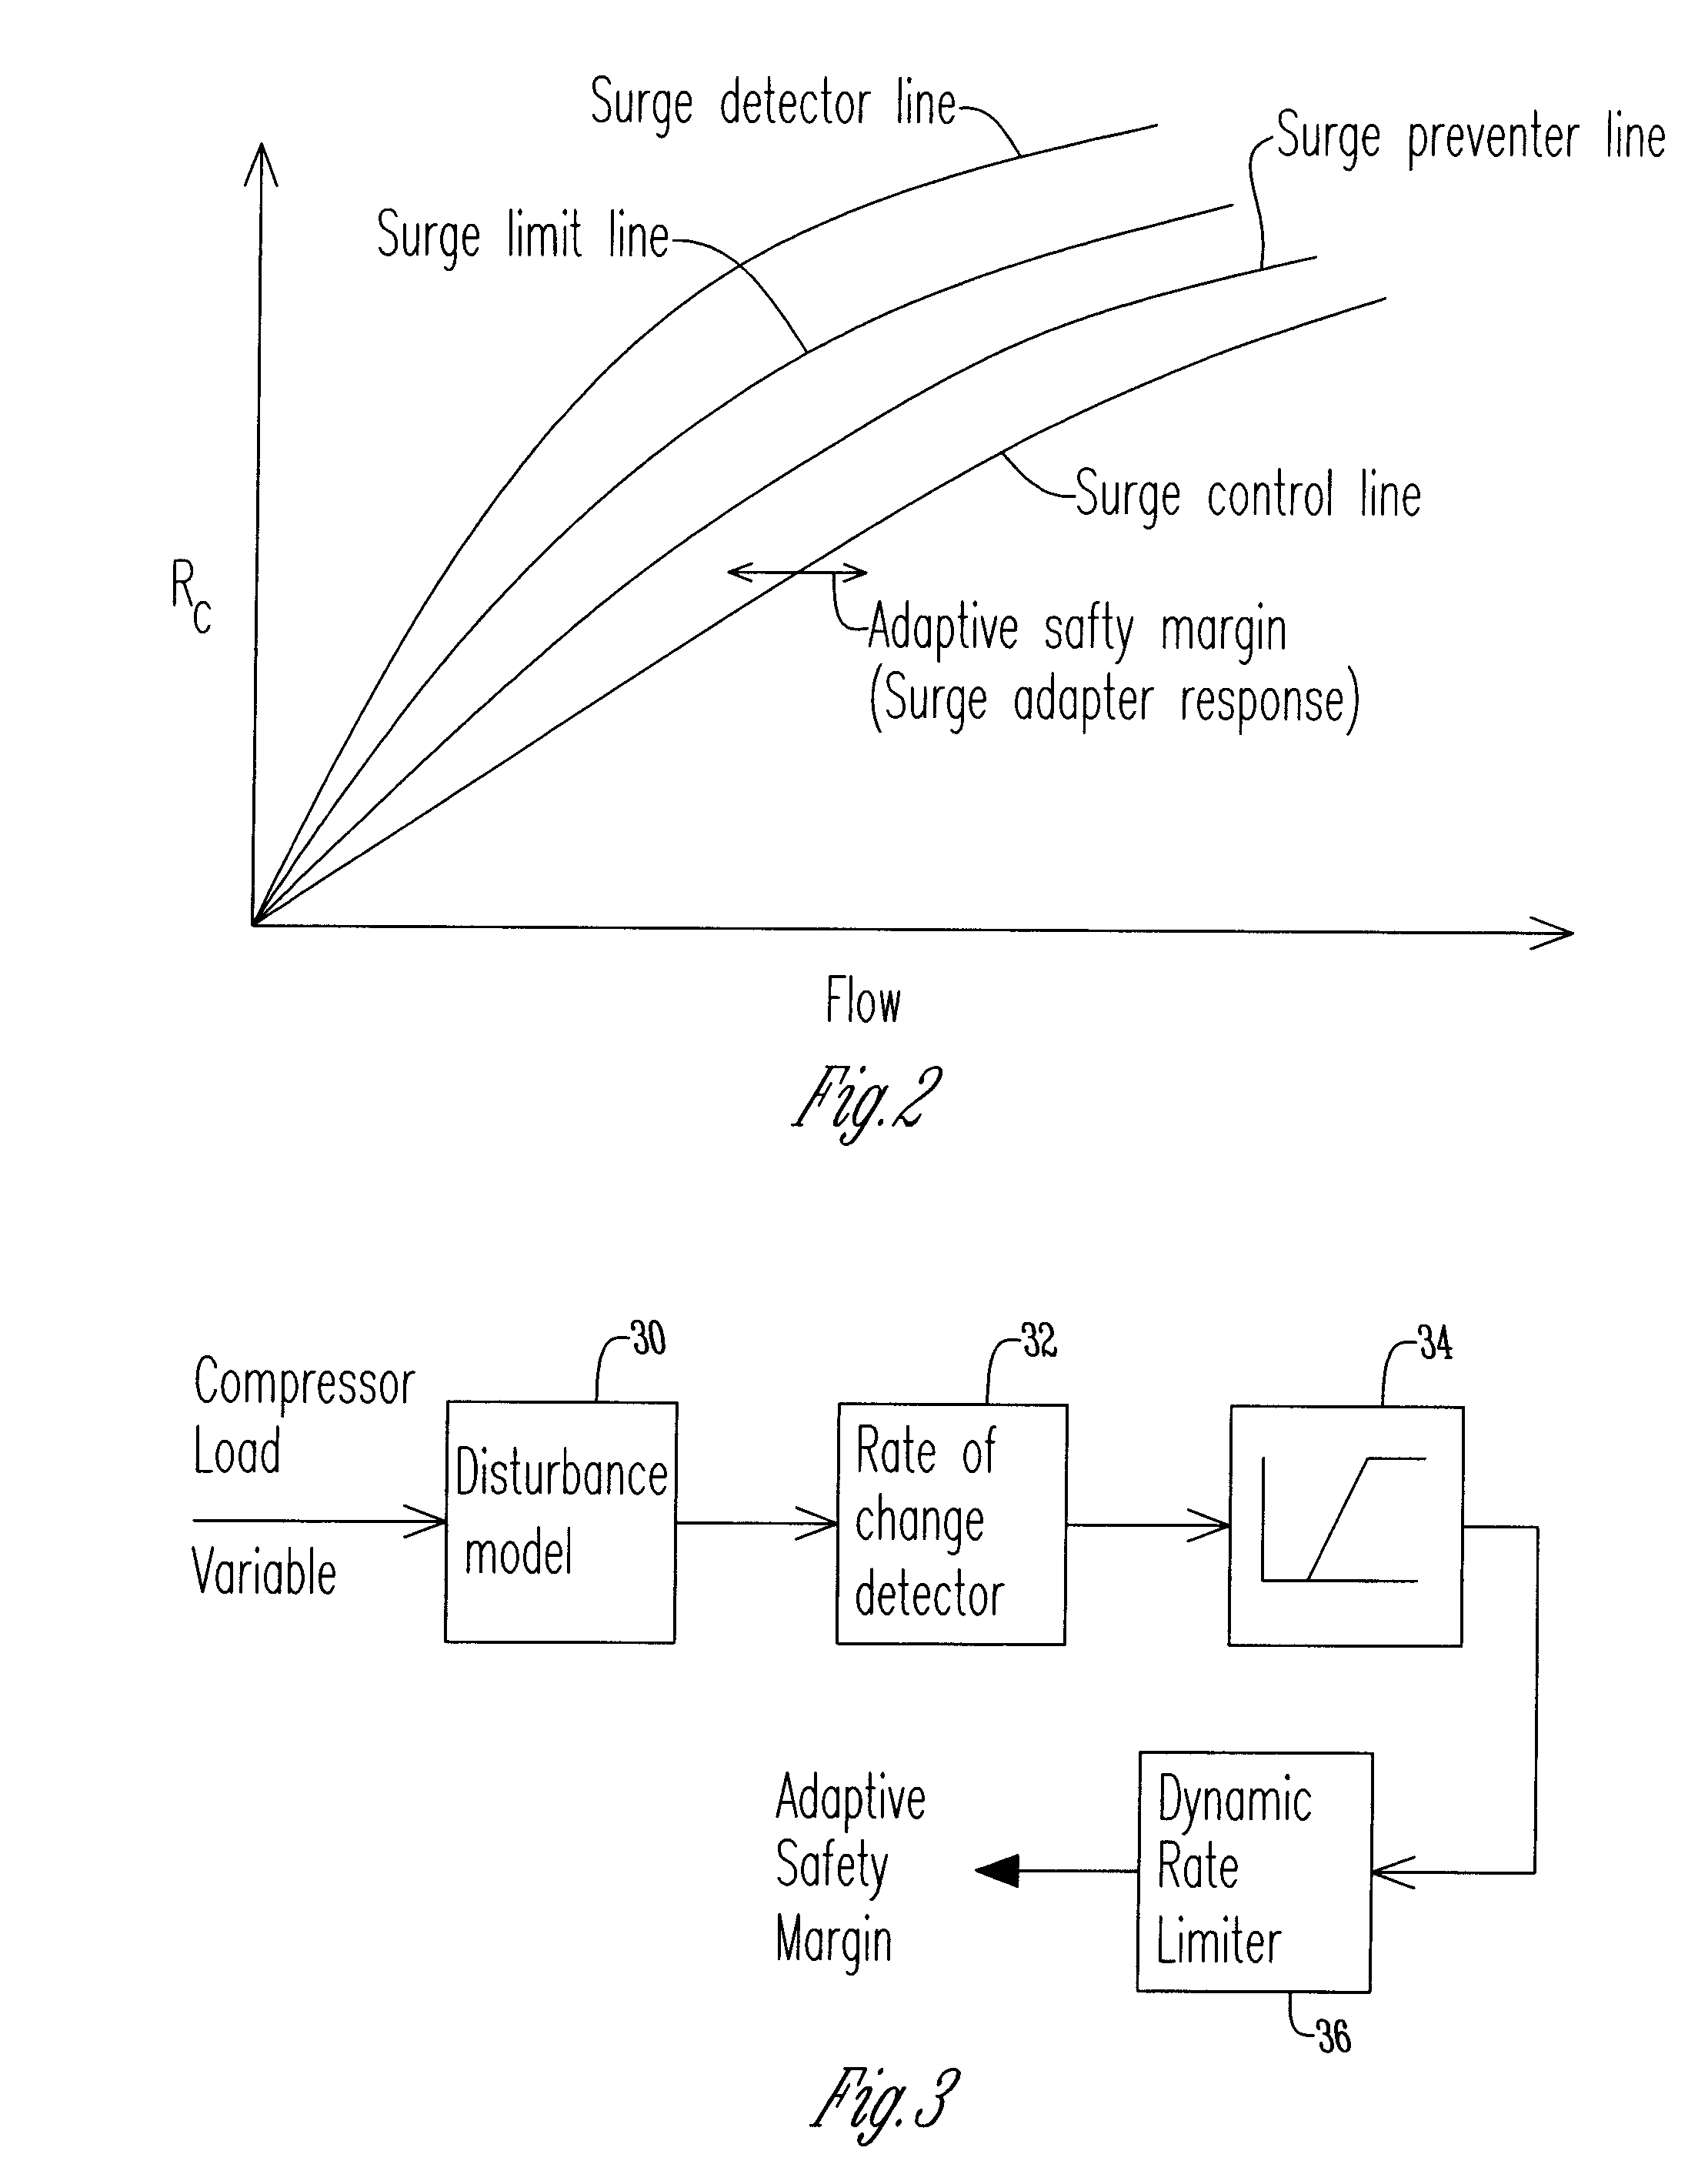 Method for preventing surge in a dynamic compressor using adaptive preventer control system and adaptive safety margin